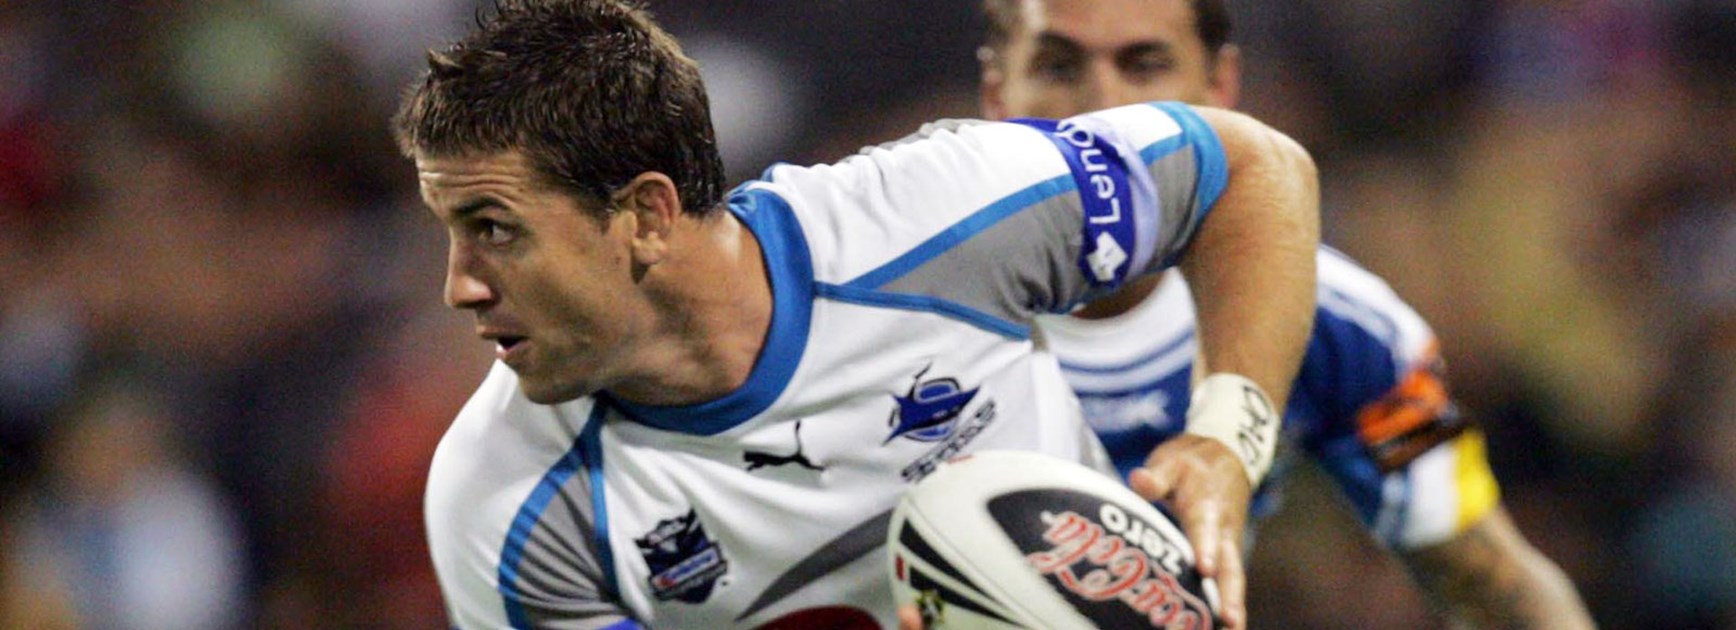 Josh Hannay in action for the Sharks in 2007.